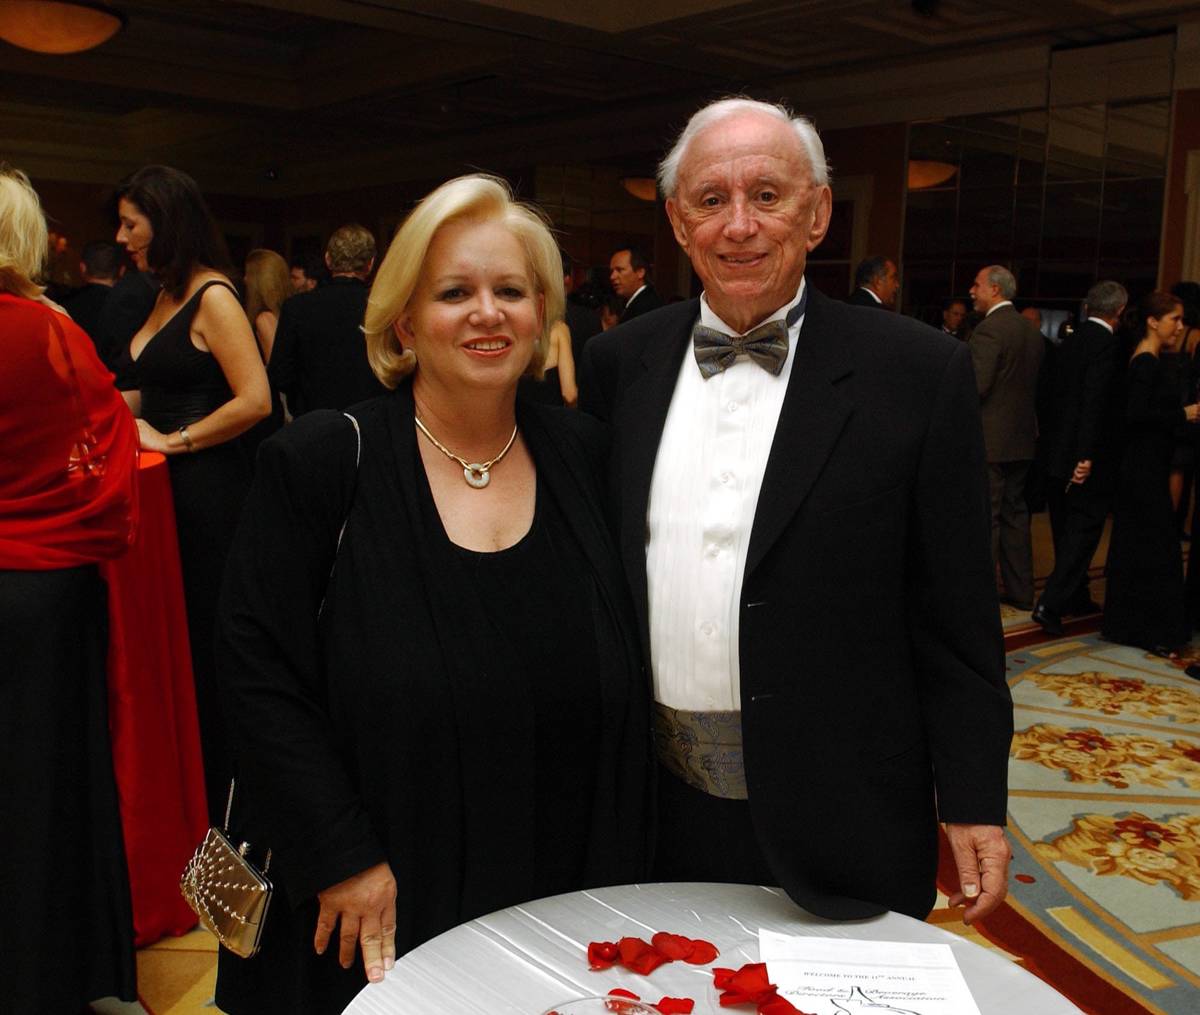 Nancy and Jack Weinstein at Caesars Palace on Saturday, May 31, 2002. (Denise Truscello)